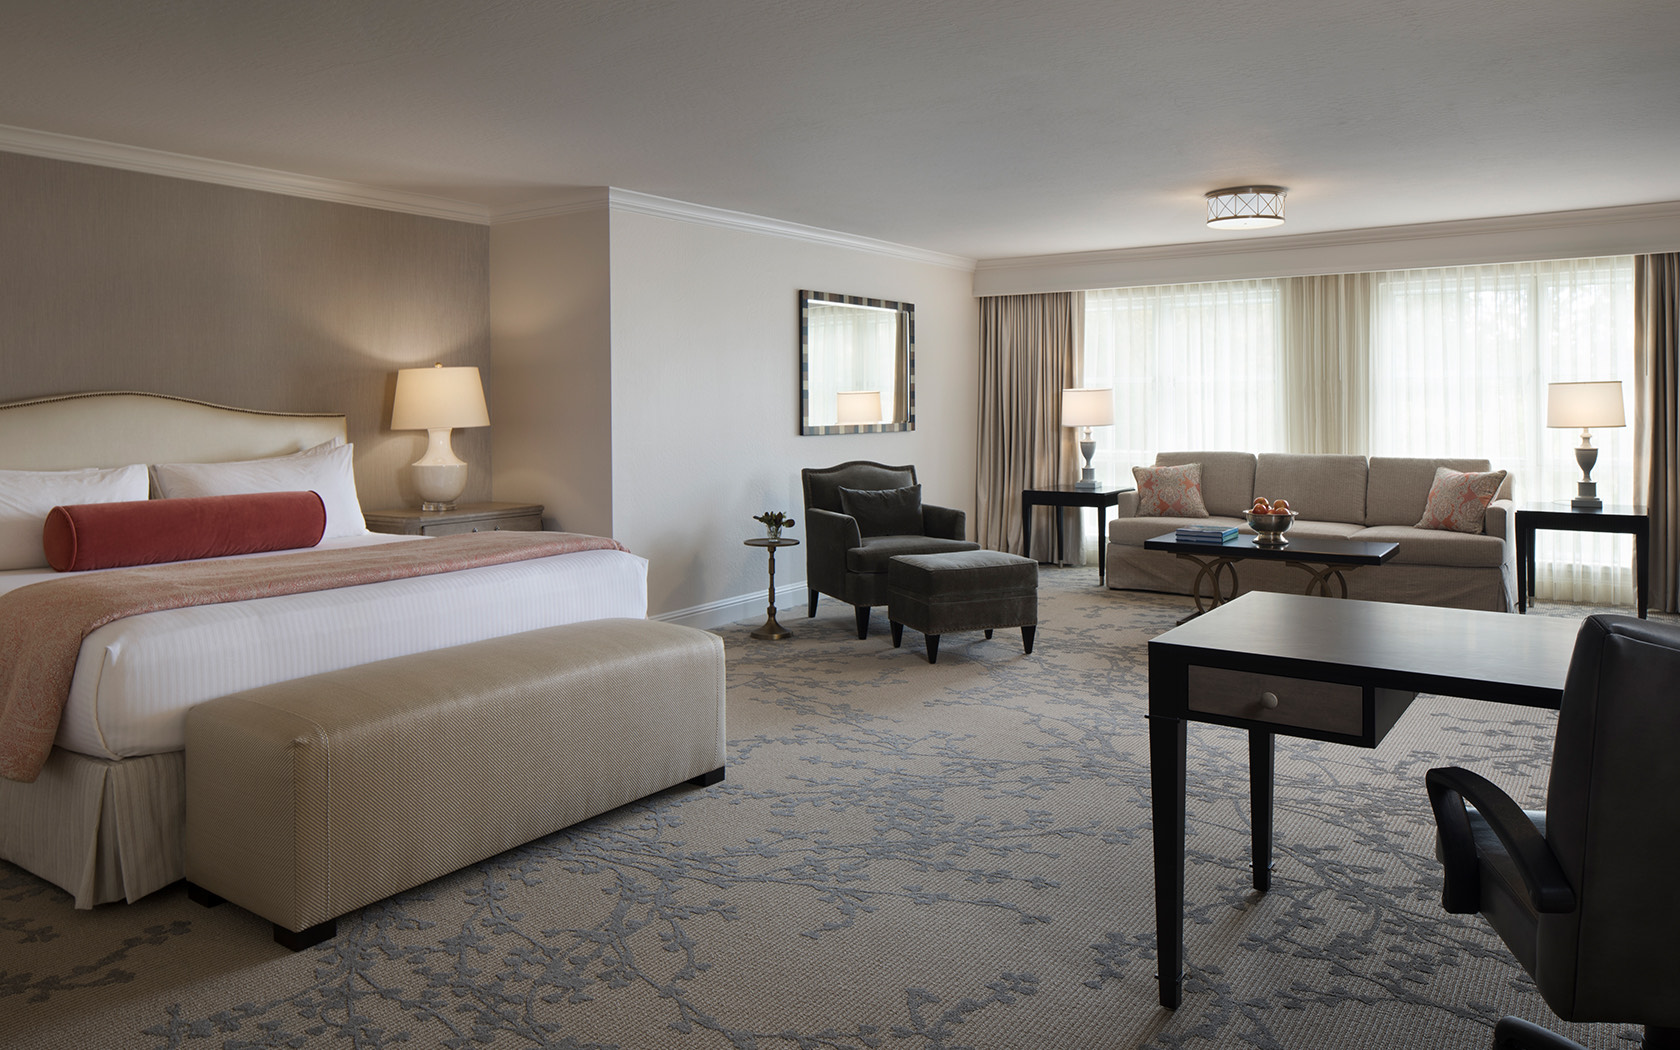 Internal view of La Petite Suite with sophisticated furniture